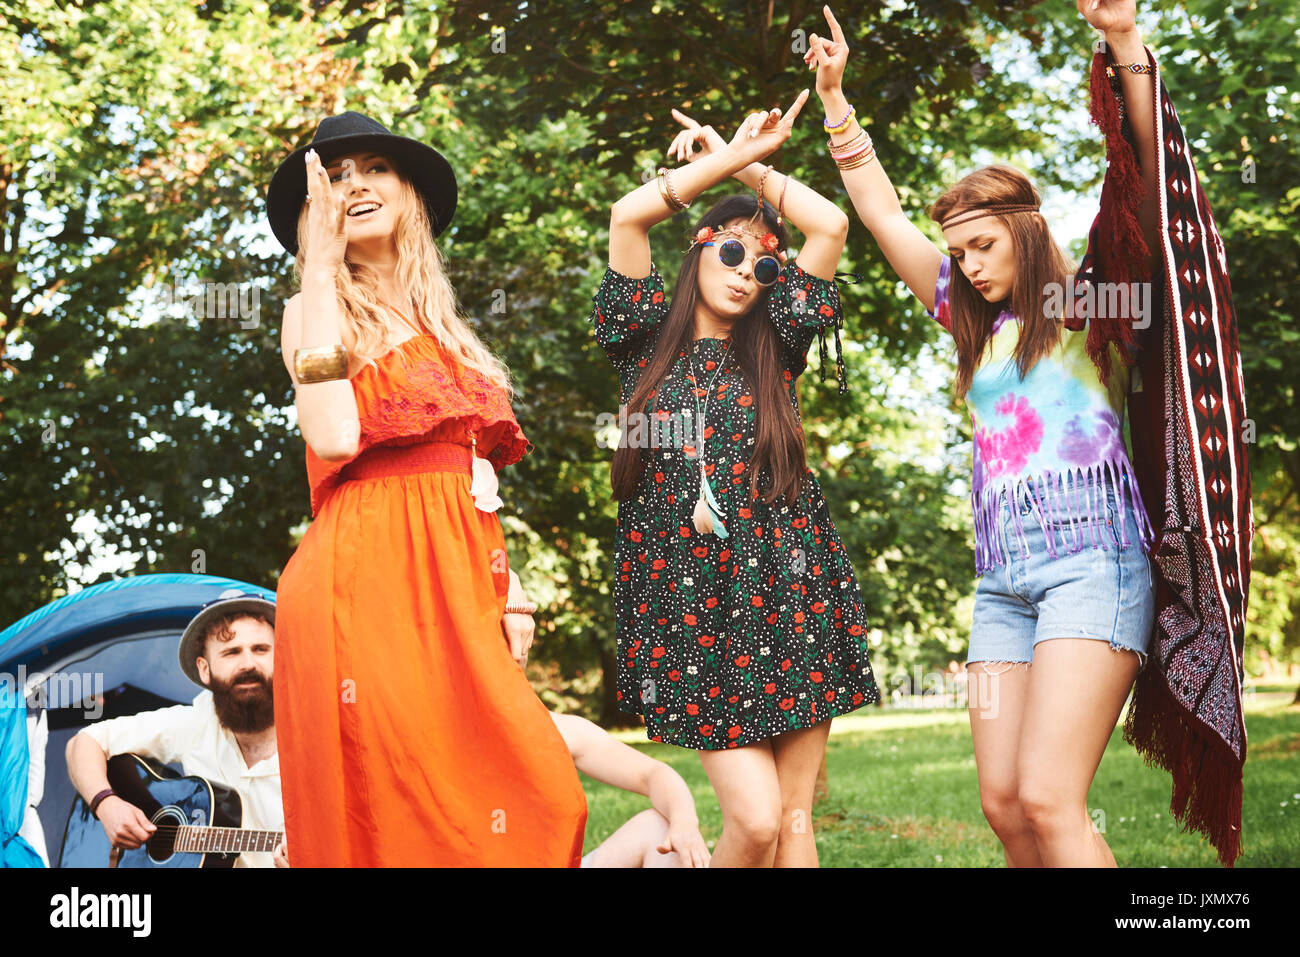 Three young boho women dancing together at festival Stock Photo